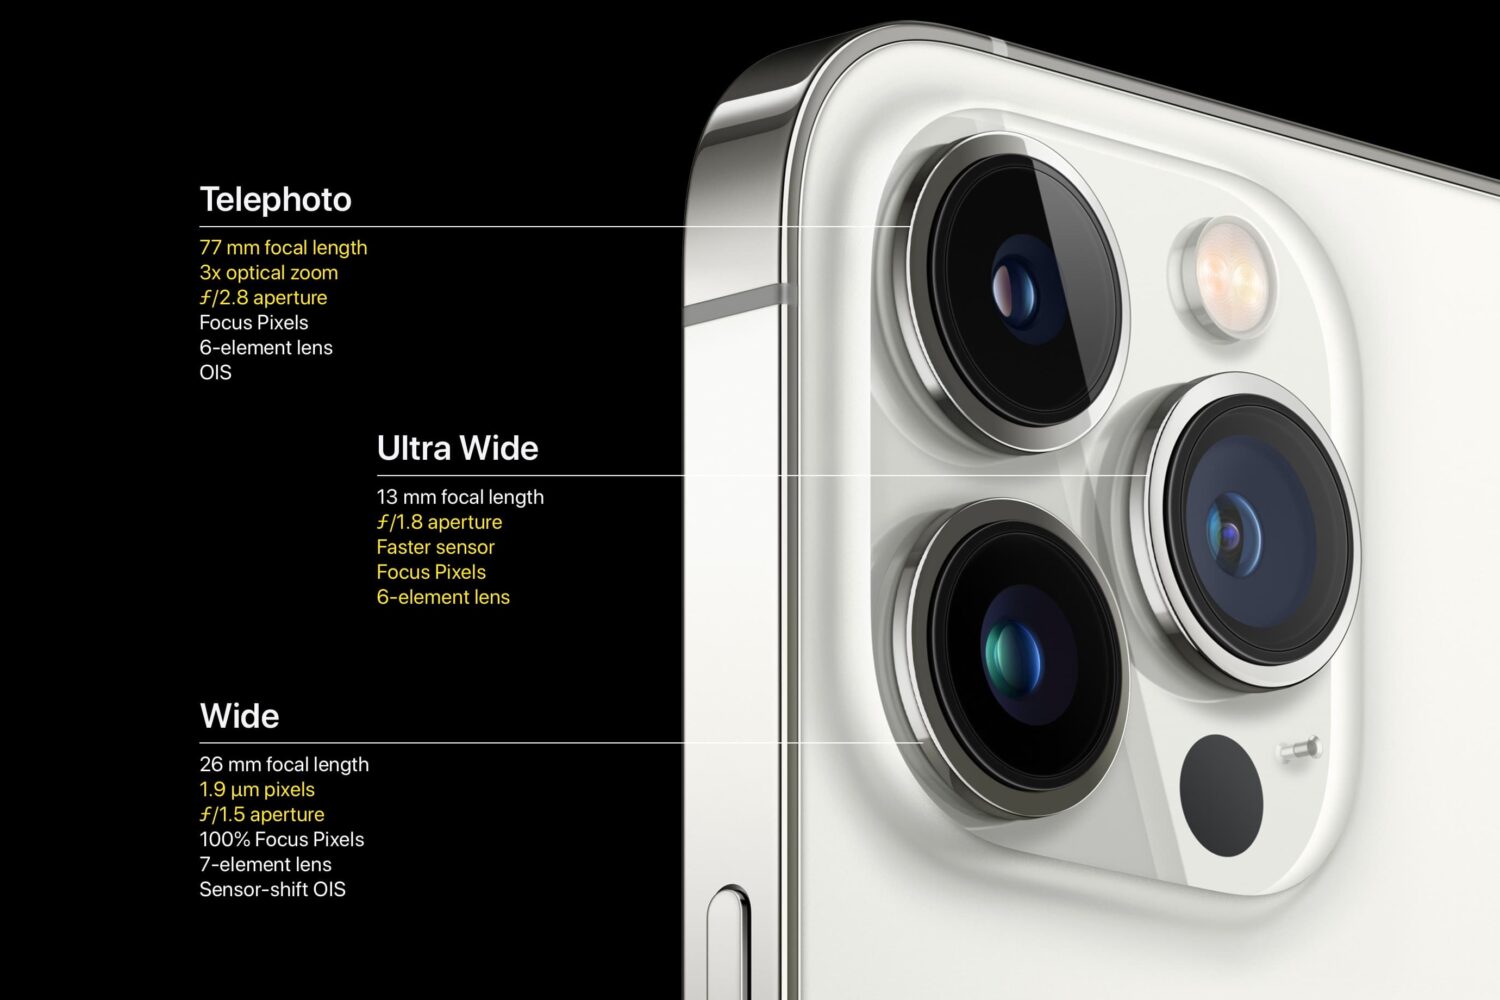 Marketing image showcasing the features of the iPhone 13 Pro camera system